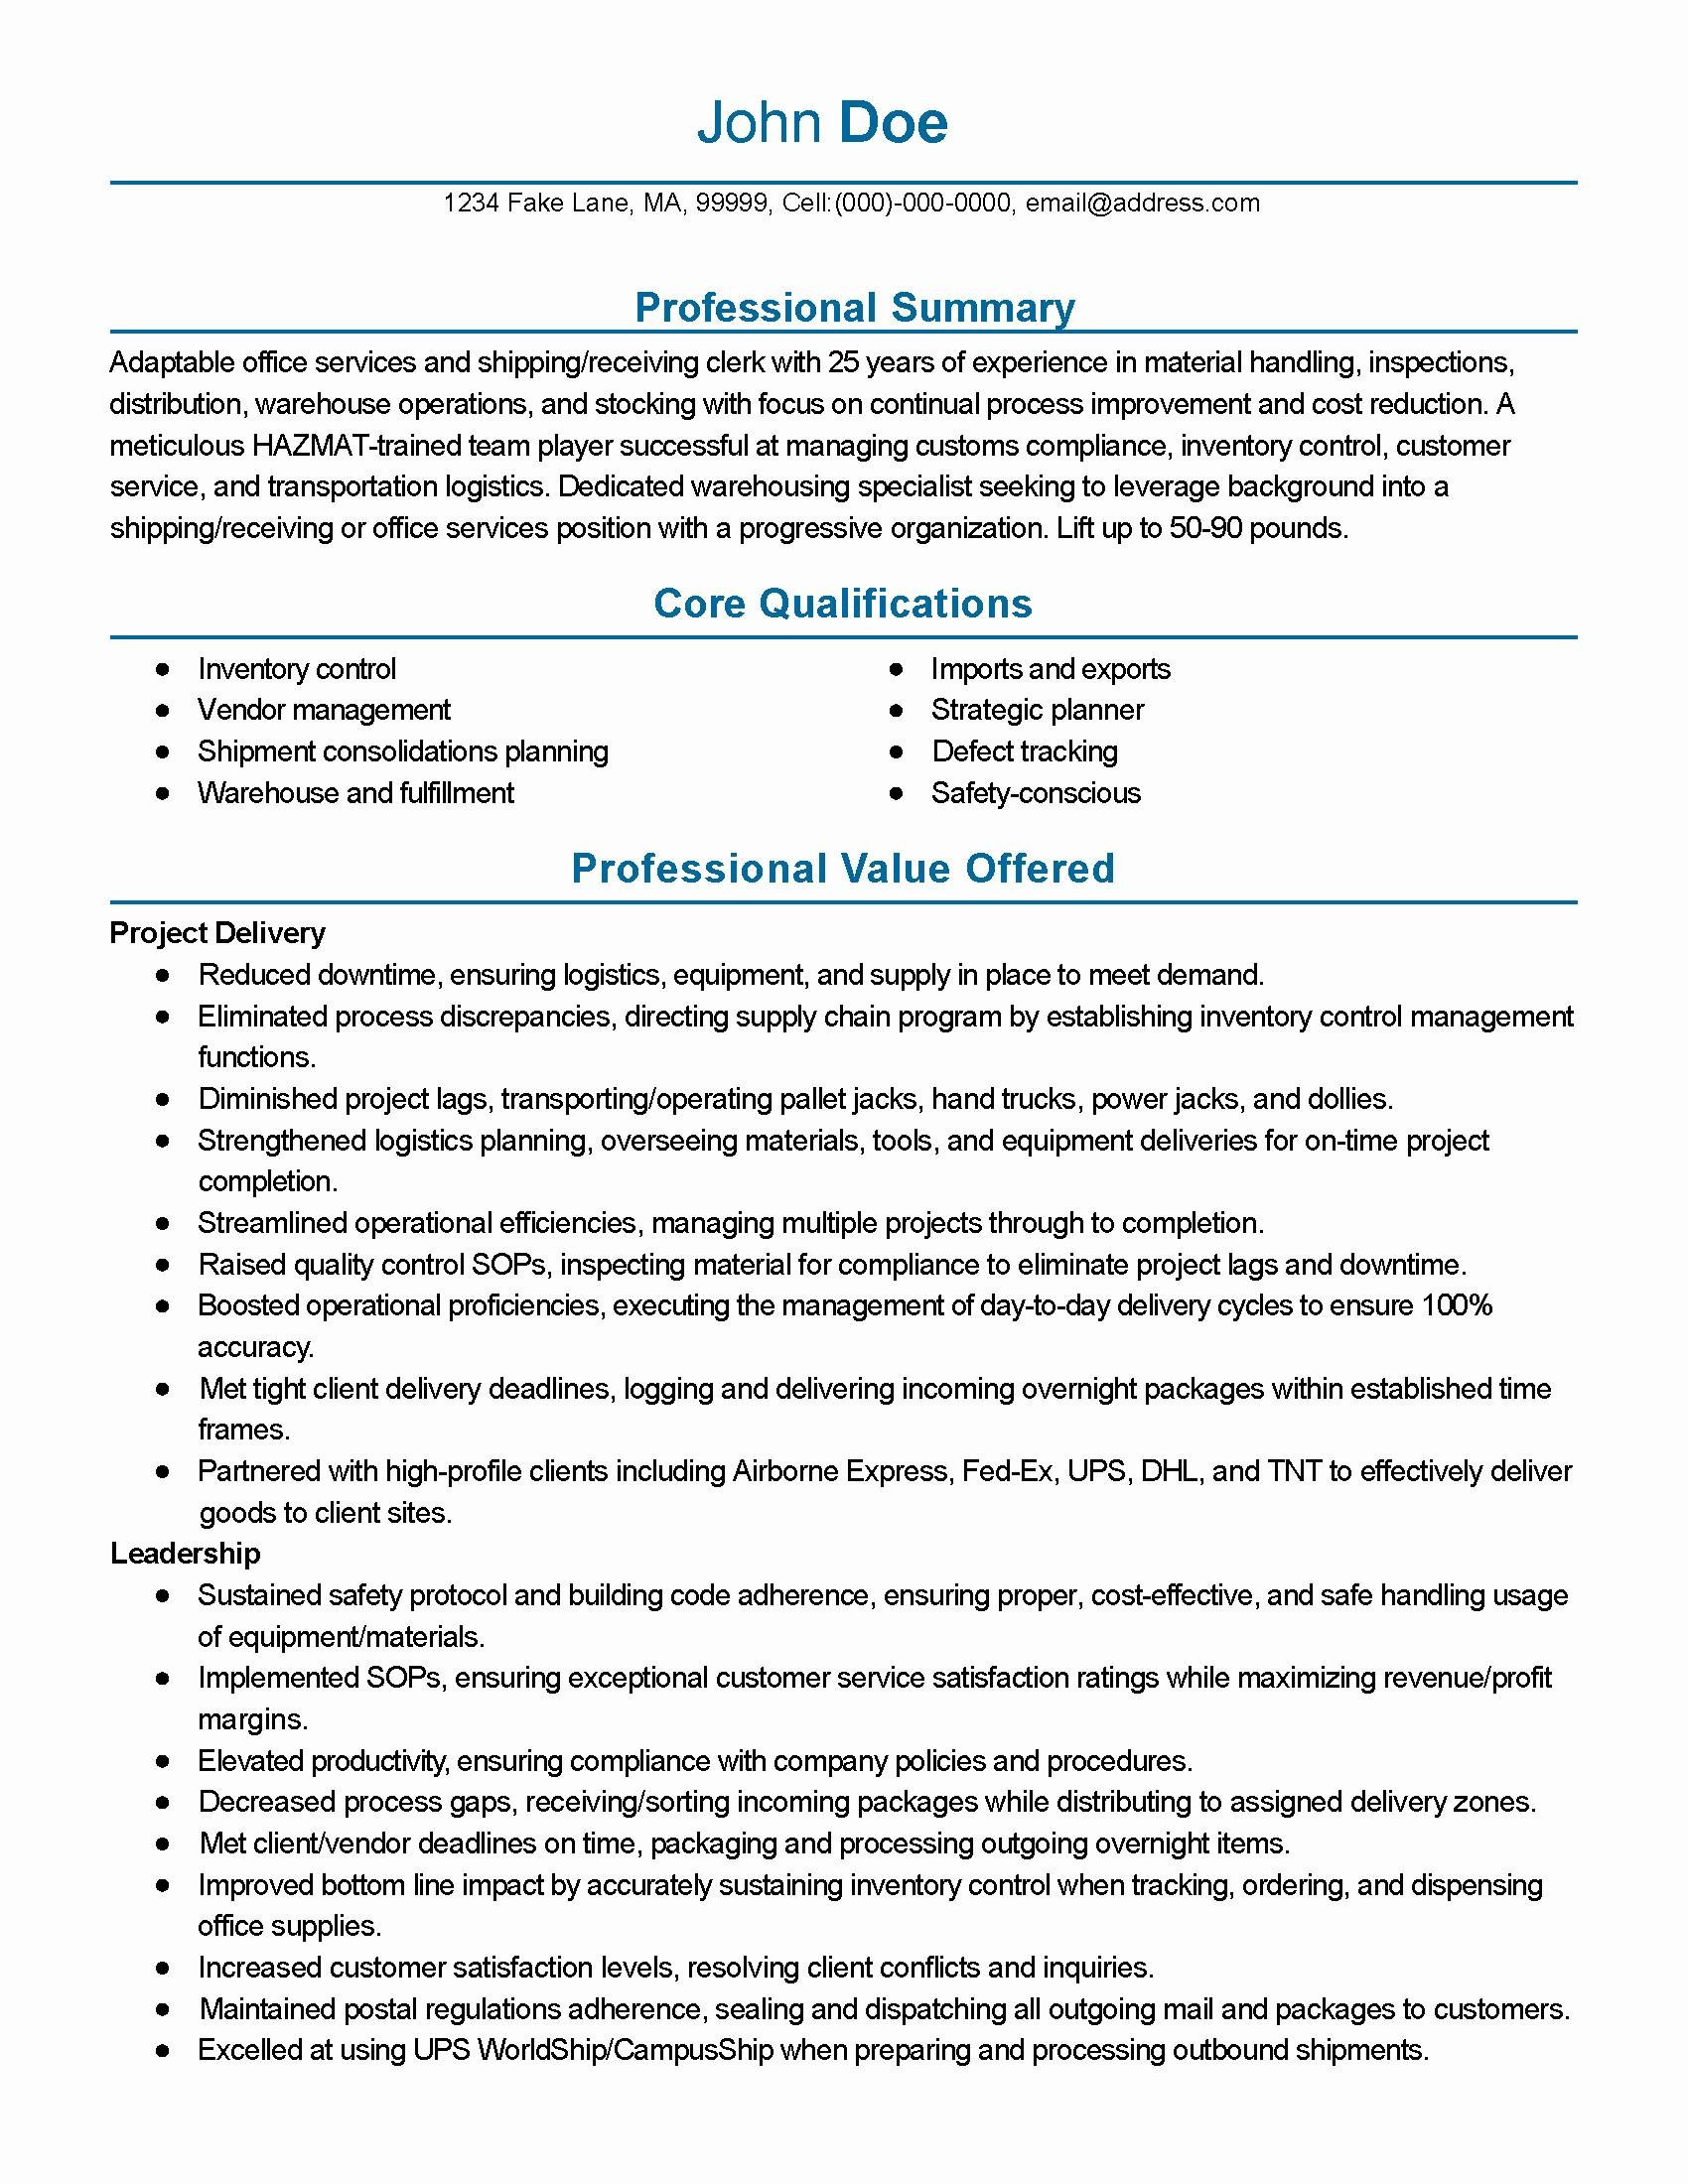 Sample Resume for Shipping and Receiving Coordinator Shipping Clerk Resume October 2021